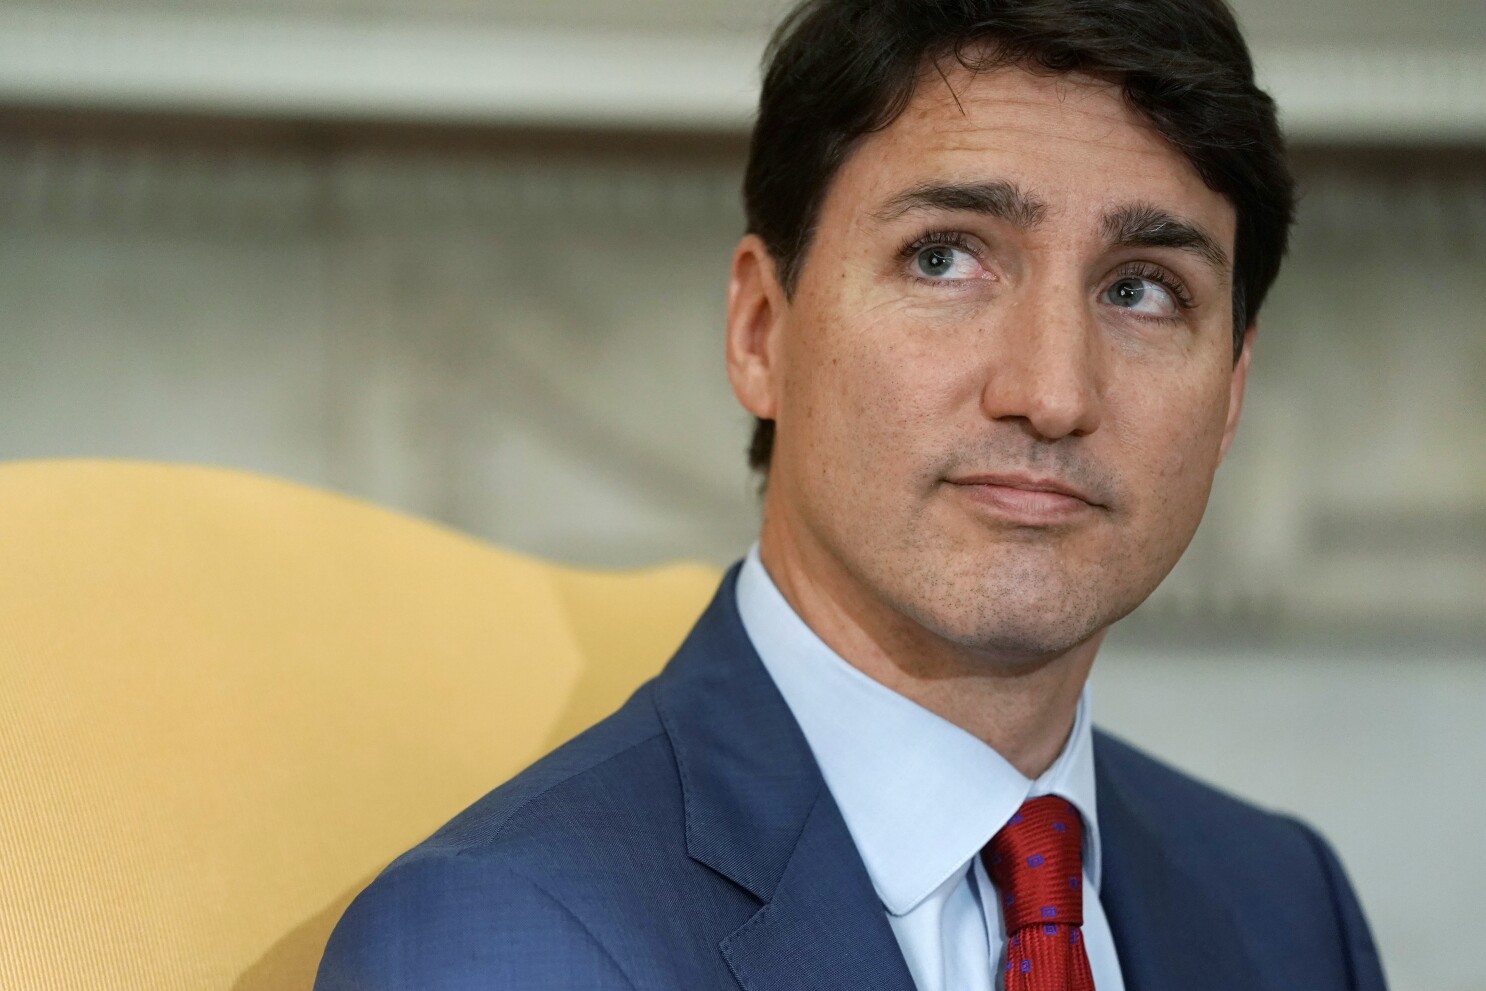 Photo of Justin Trudeau in brownface surfaces amid reelection campaign - Los Angeles Times